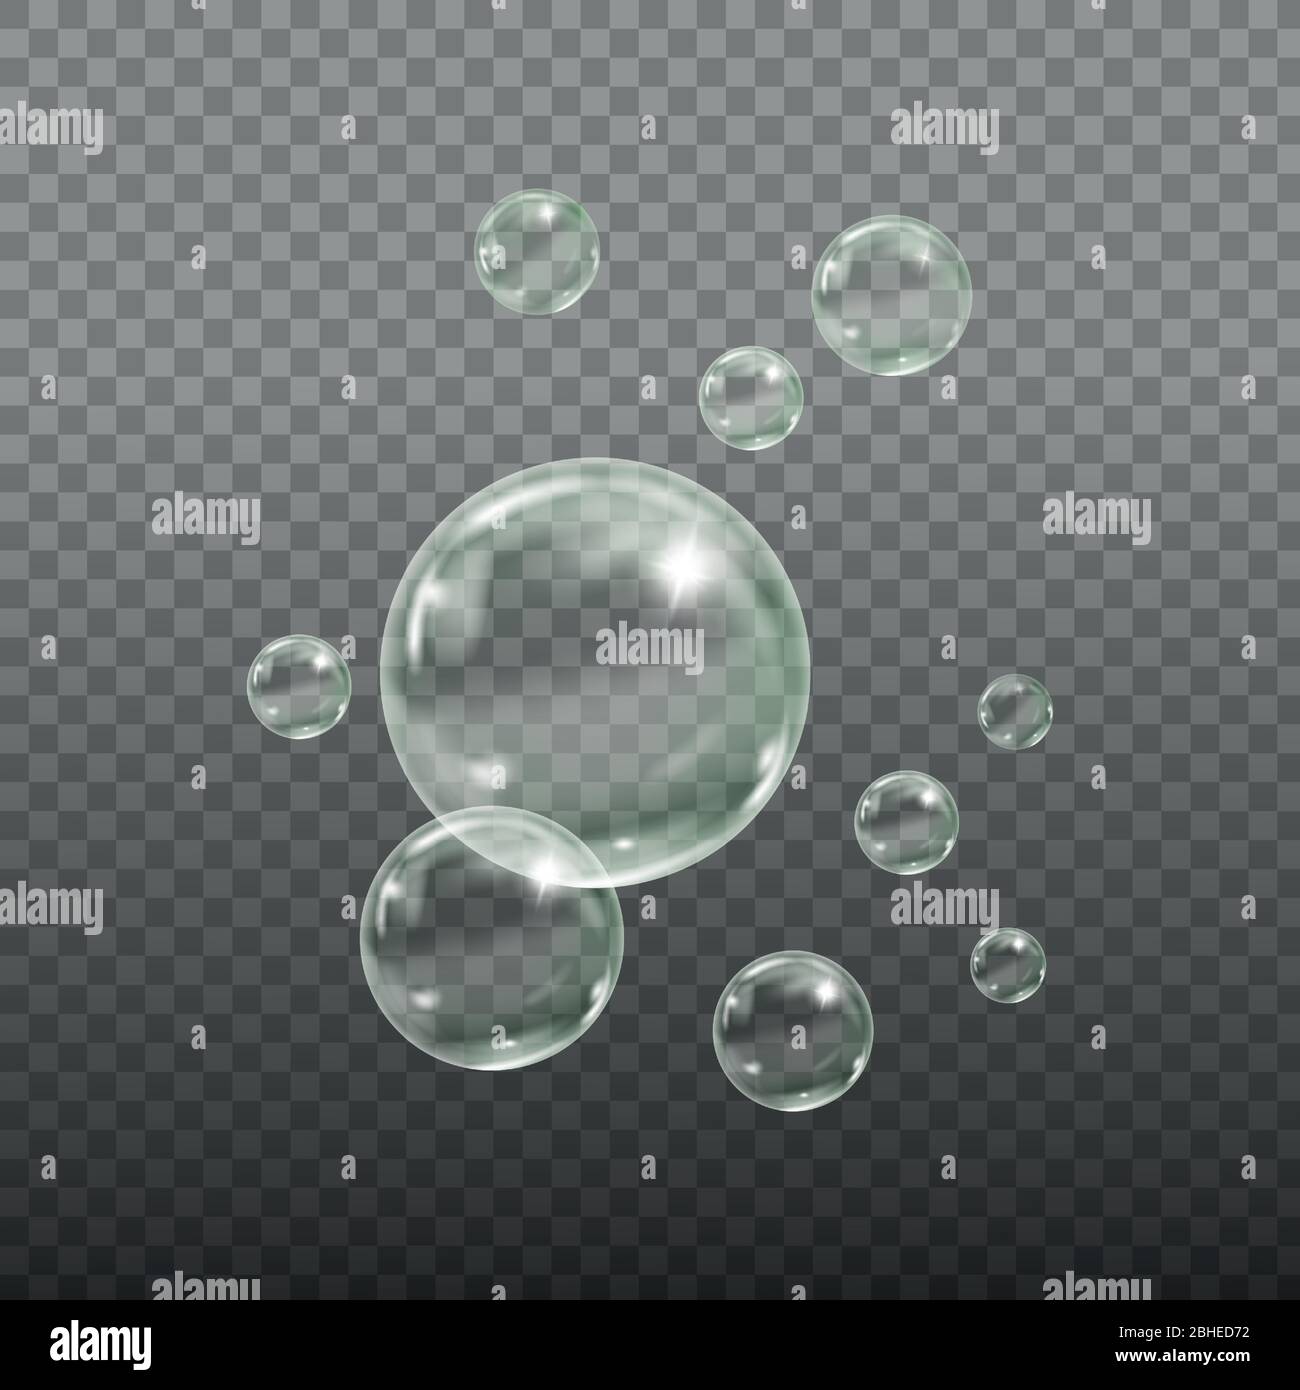 Flying transparent soap bubbles on checkered background. Stock Vector